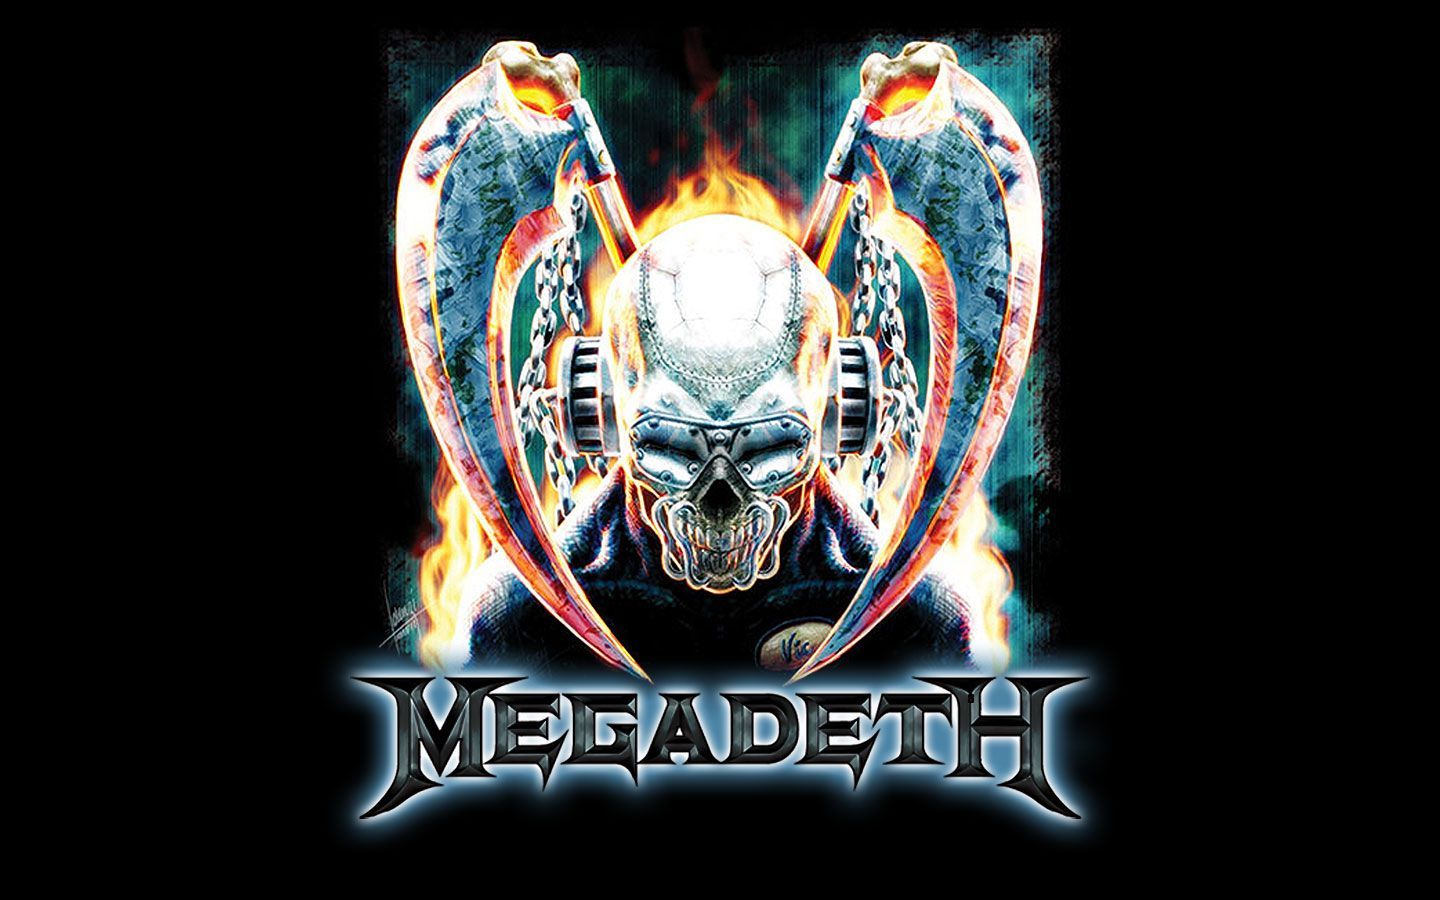 Heavy metal megadeth wallpaper - (#179009) - High Quality and ...